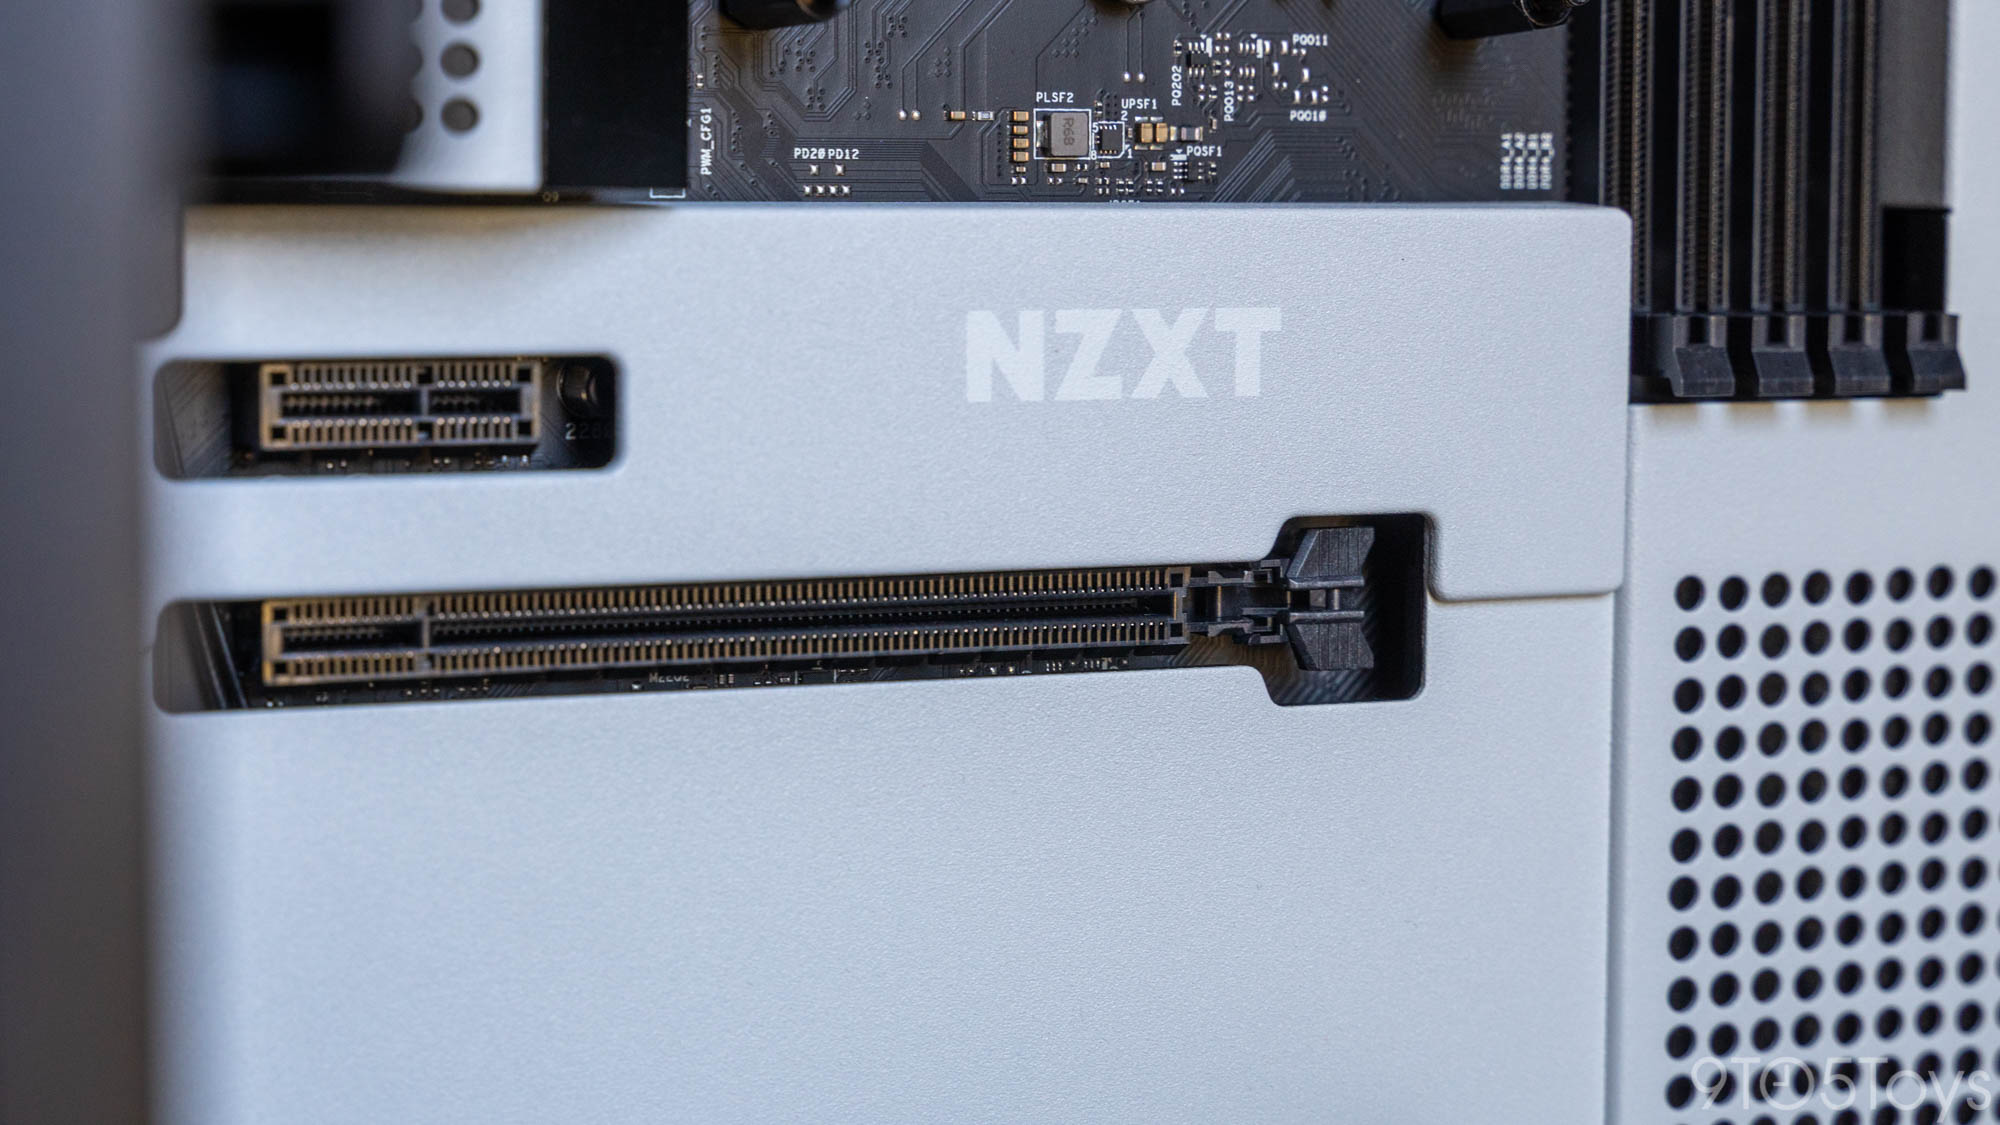 NZXT N7 Z490 has a premium design + 10th gen Intel support - 9to5Toys